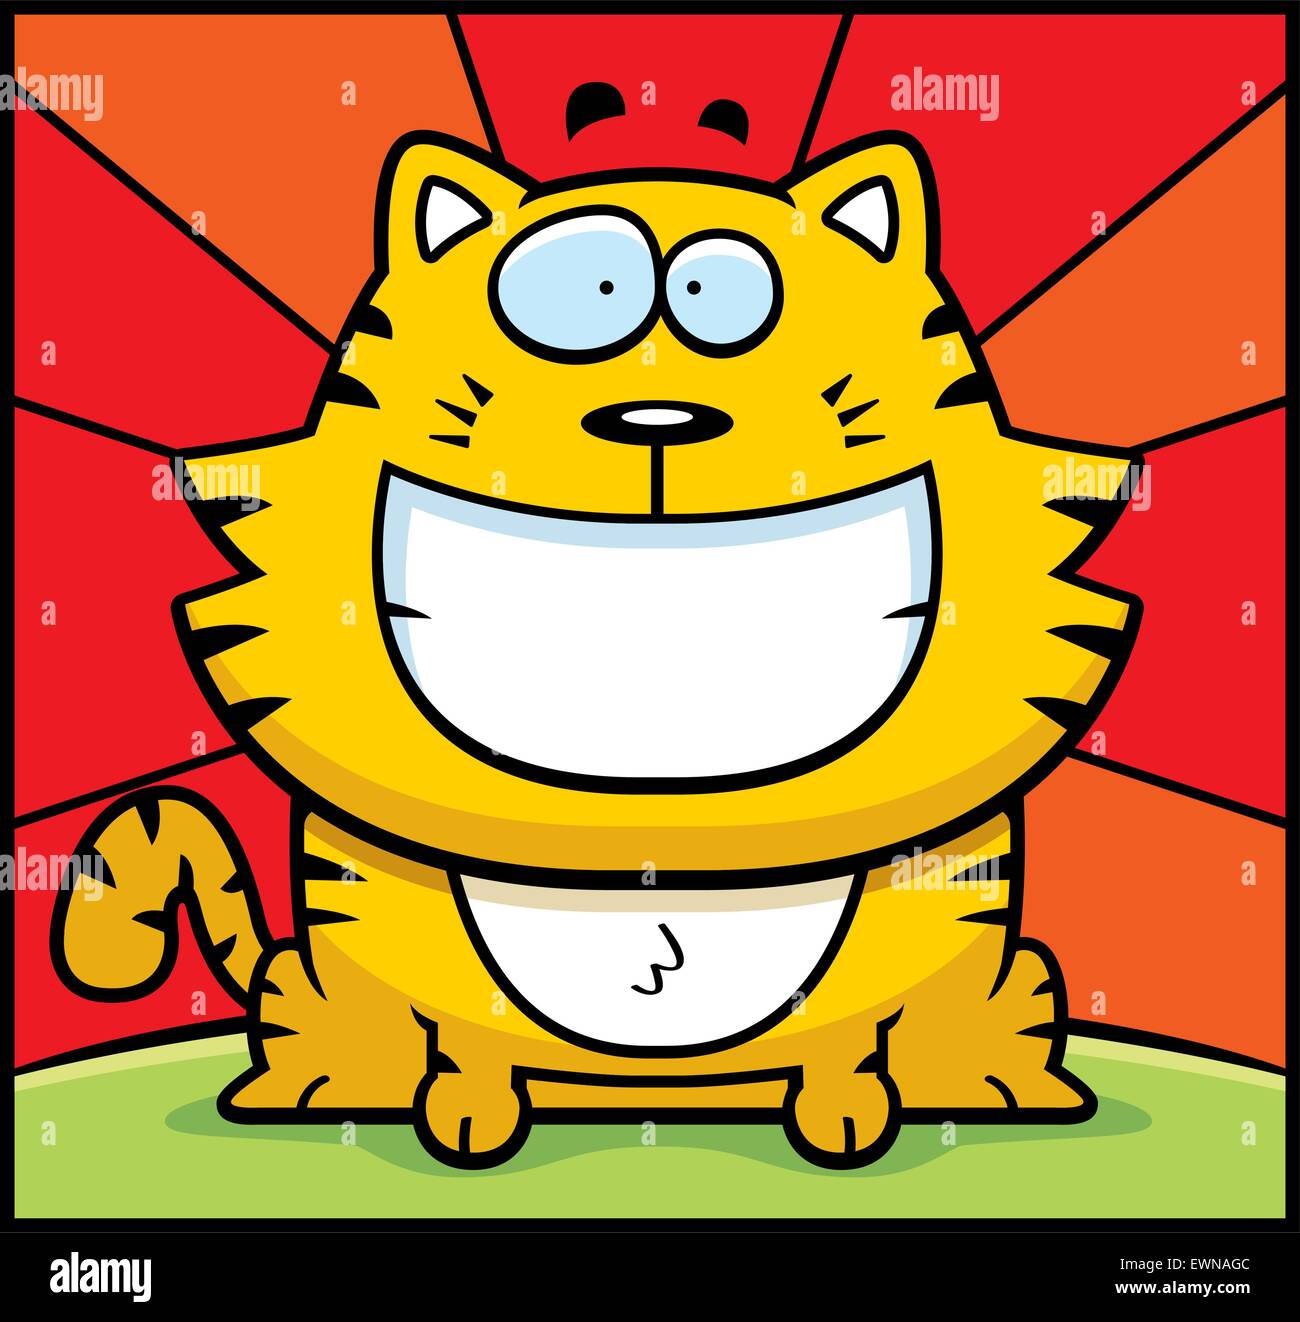 A happy cartoon cat sitting and smiling. Stock Vector